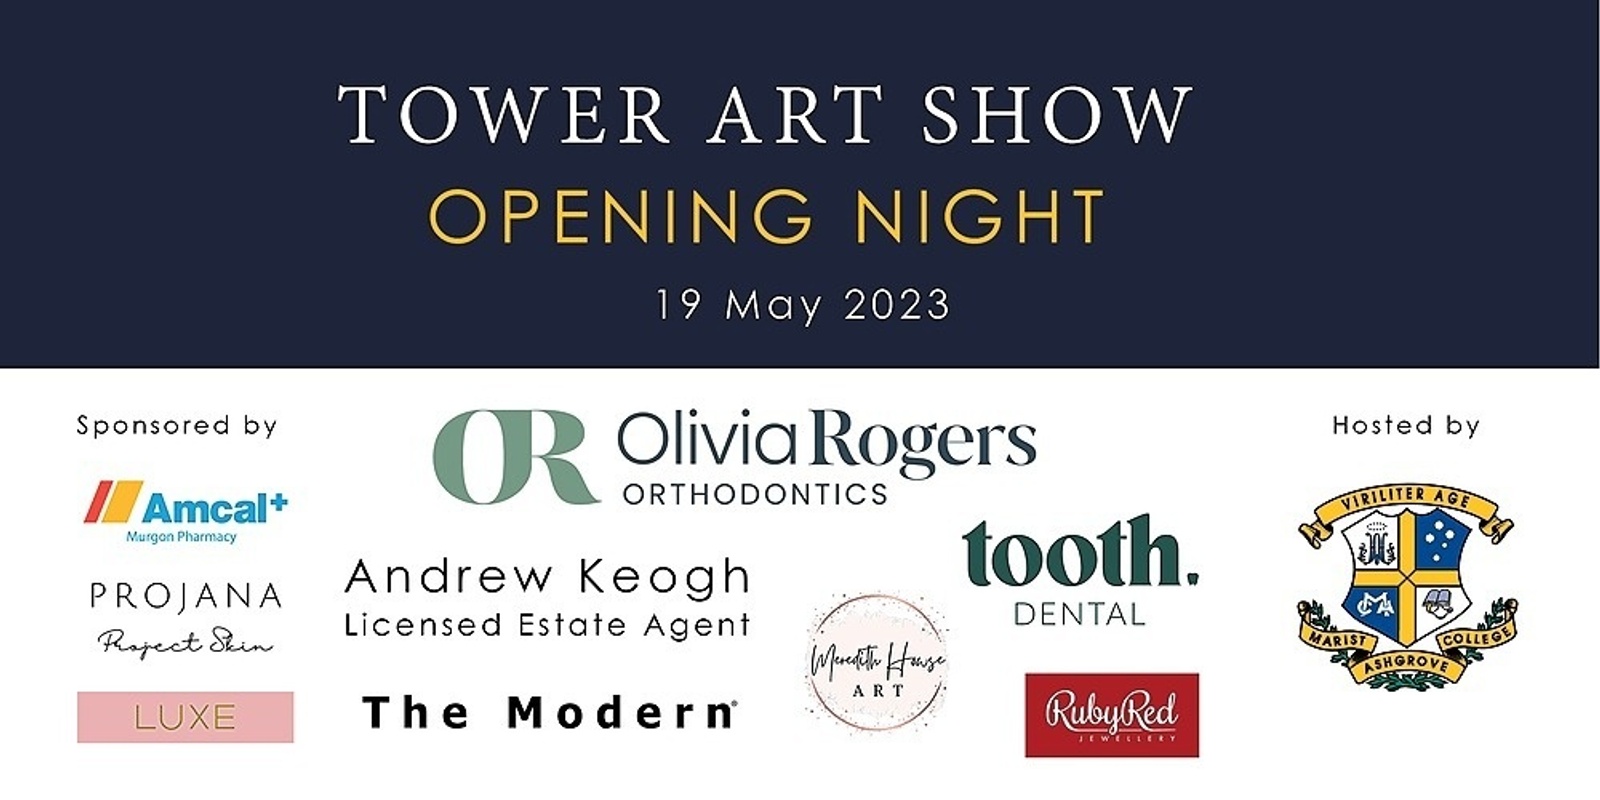 Banner image for The Tower Art Show 2023 - Opening Night 